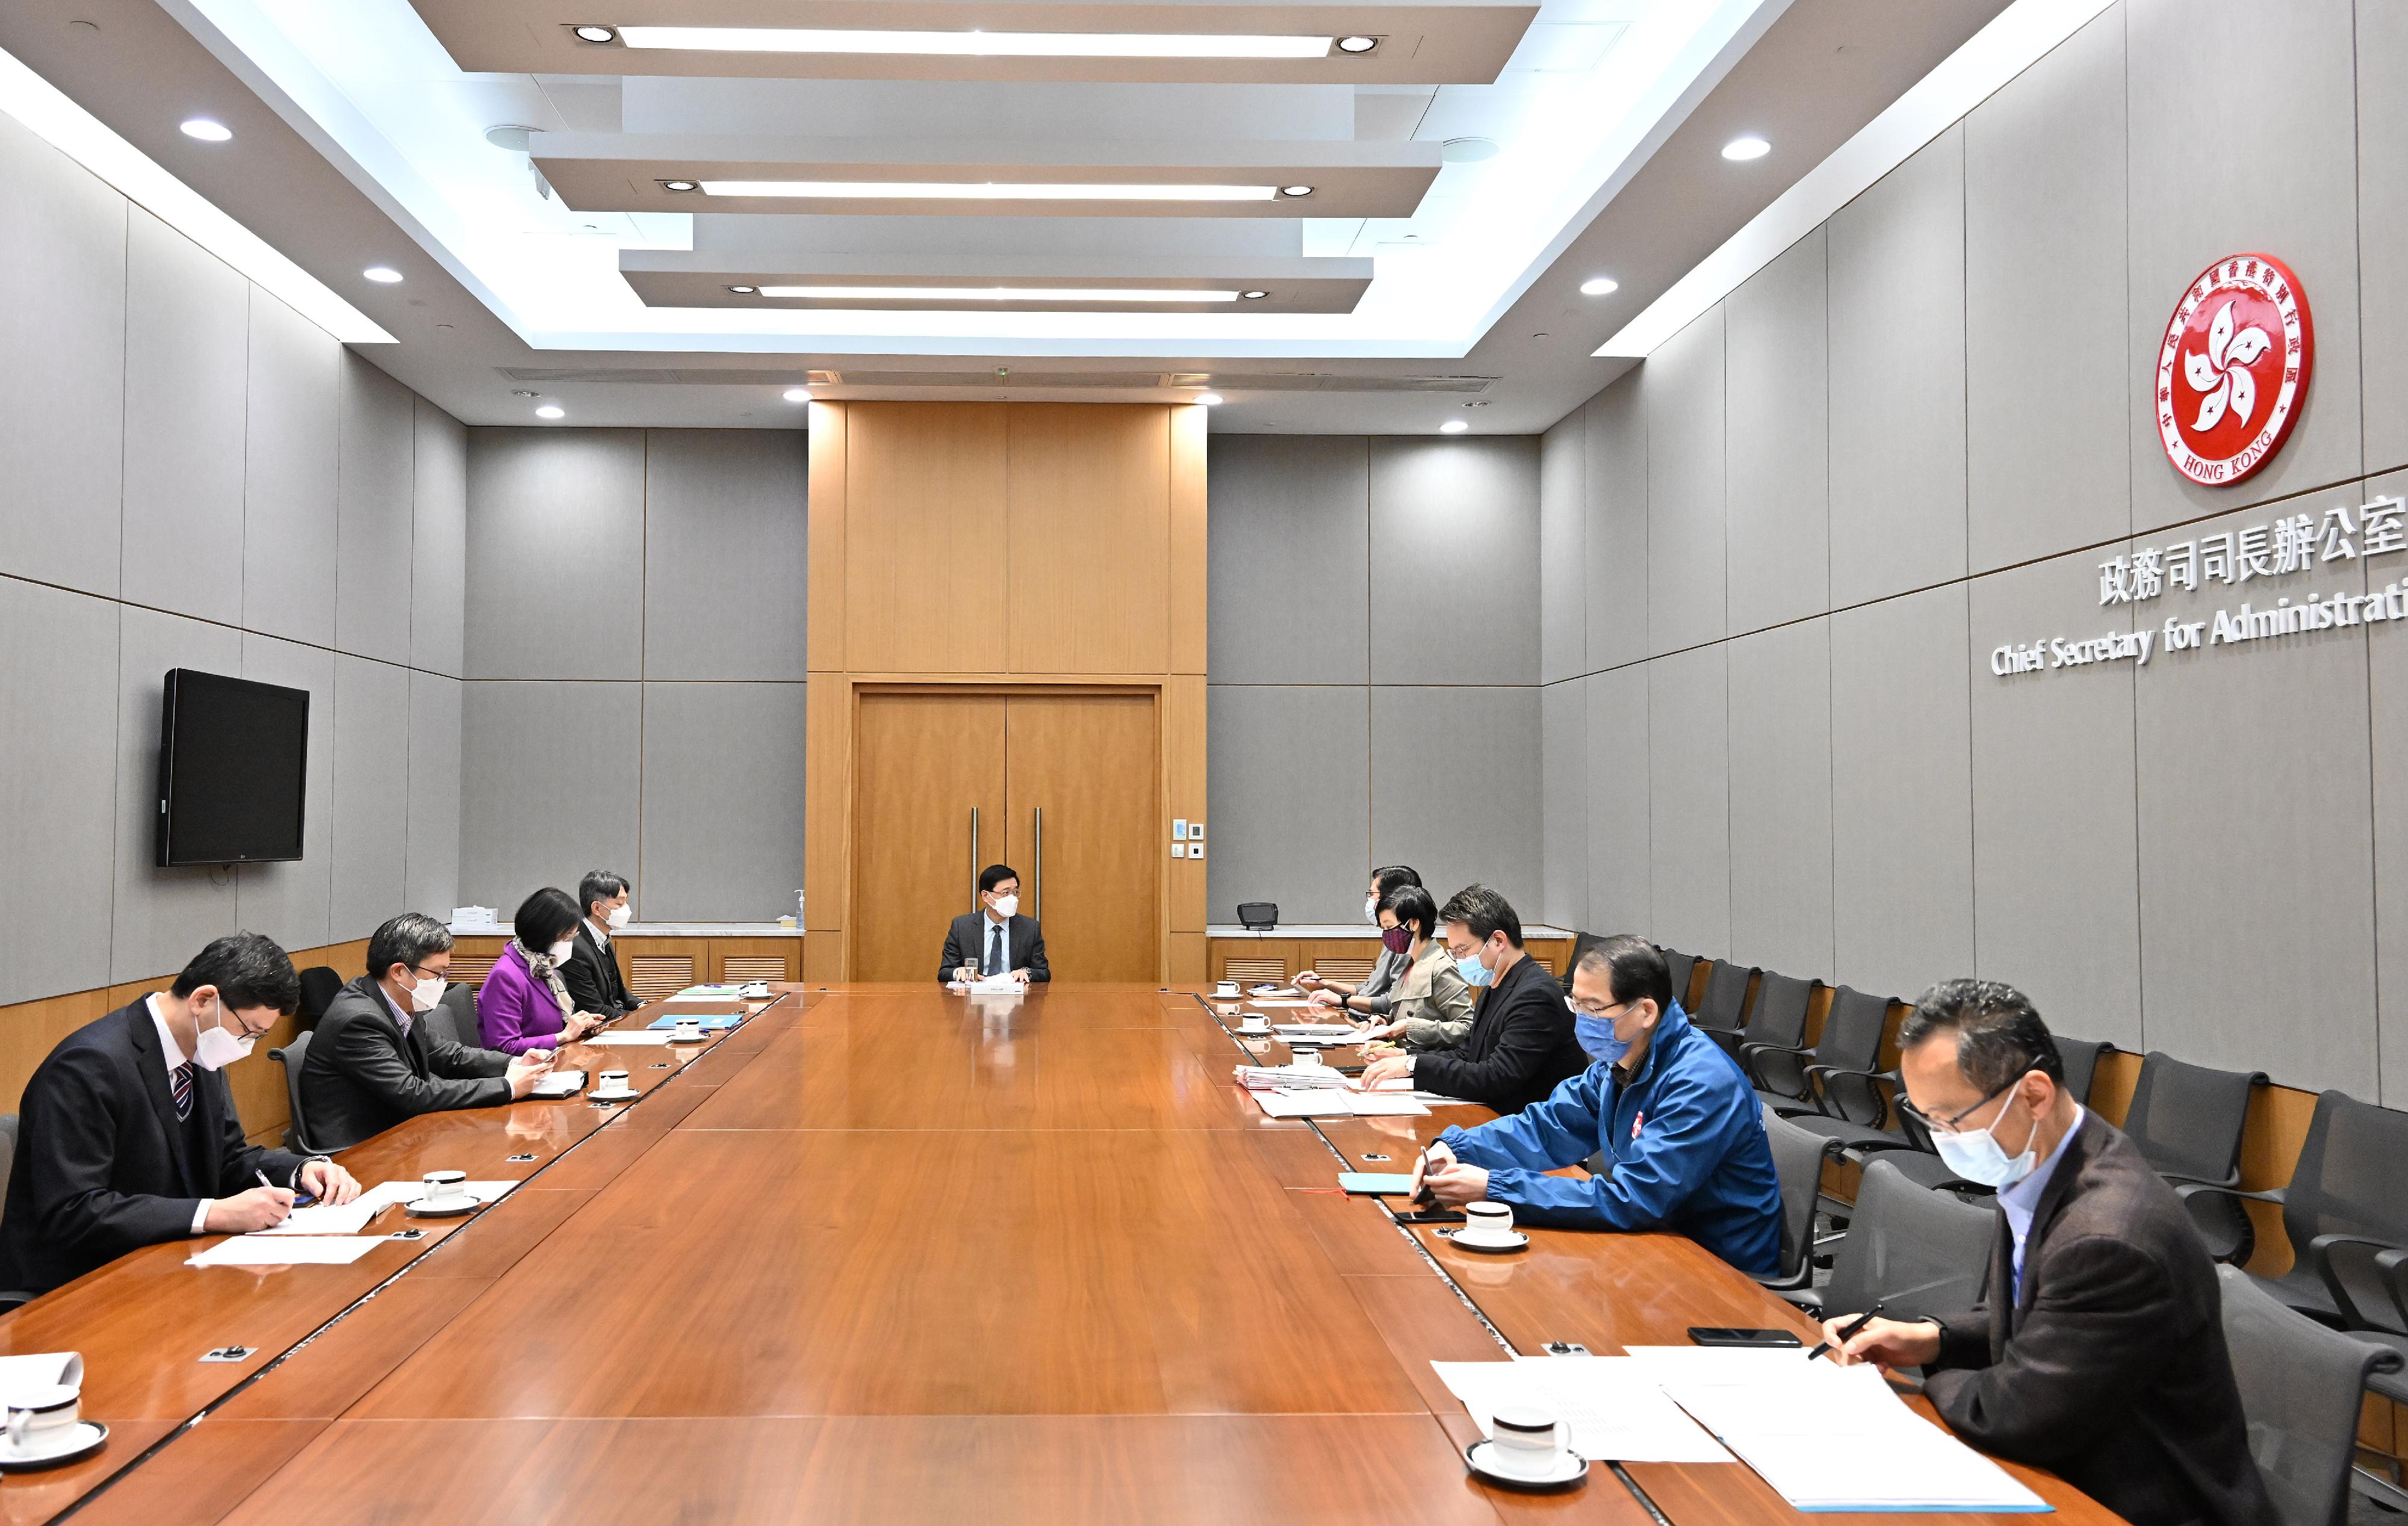 The Chief Secretary for Administration, Mr John Lee, held meetings today (February 28) on the commencement of the Tsing Yi community isolation facility. Photo shows Mr Lee (centre) chairing an inter-departmental meeting and receiving briefings from relevant bureaux and departments on the preparatory works for the commencement of the Tsing Yi community isolation facility.